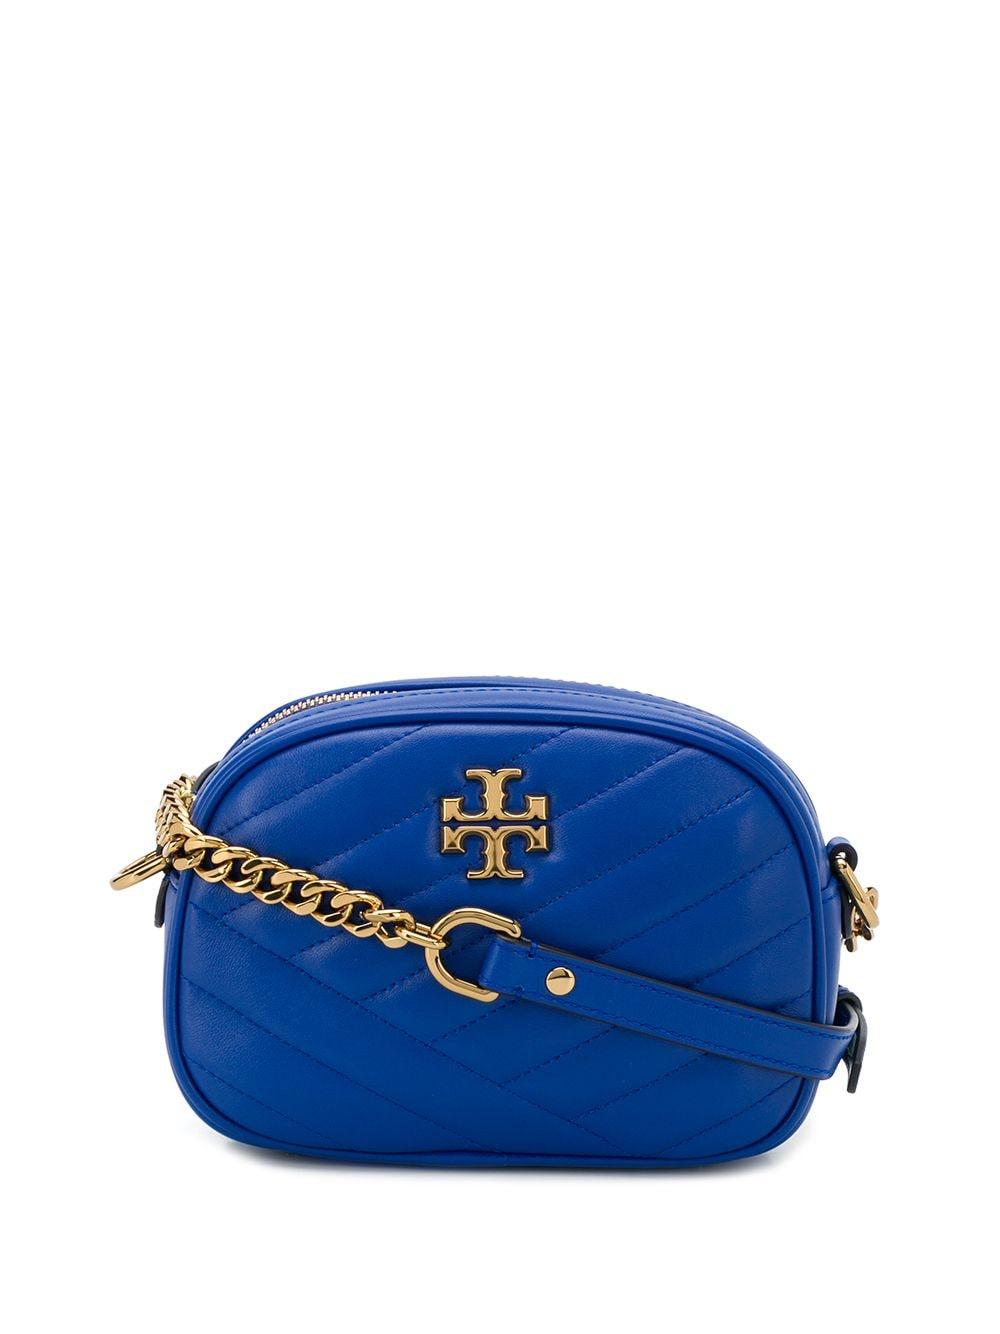 Tory Burch Leather Kira Quilted Camera Bag in Blue | Lyst